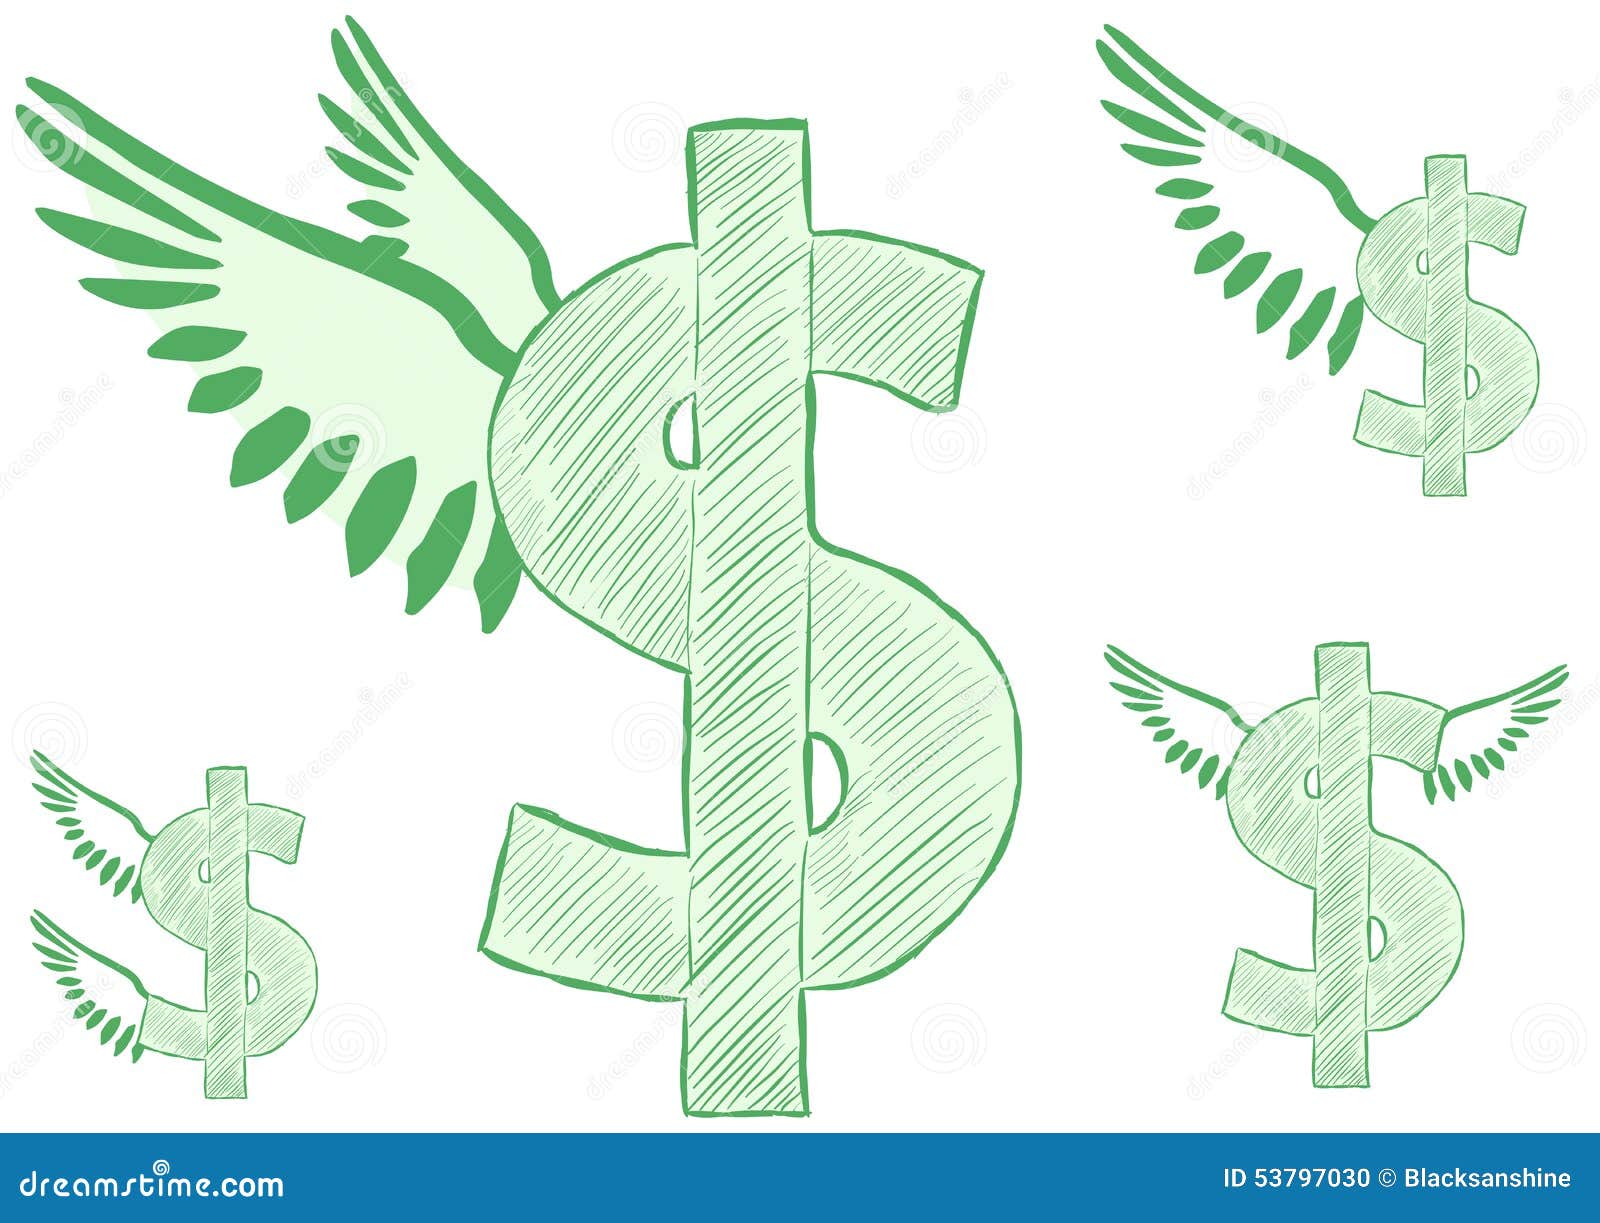 clipart flying dollar sign - photo #9